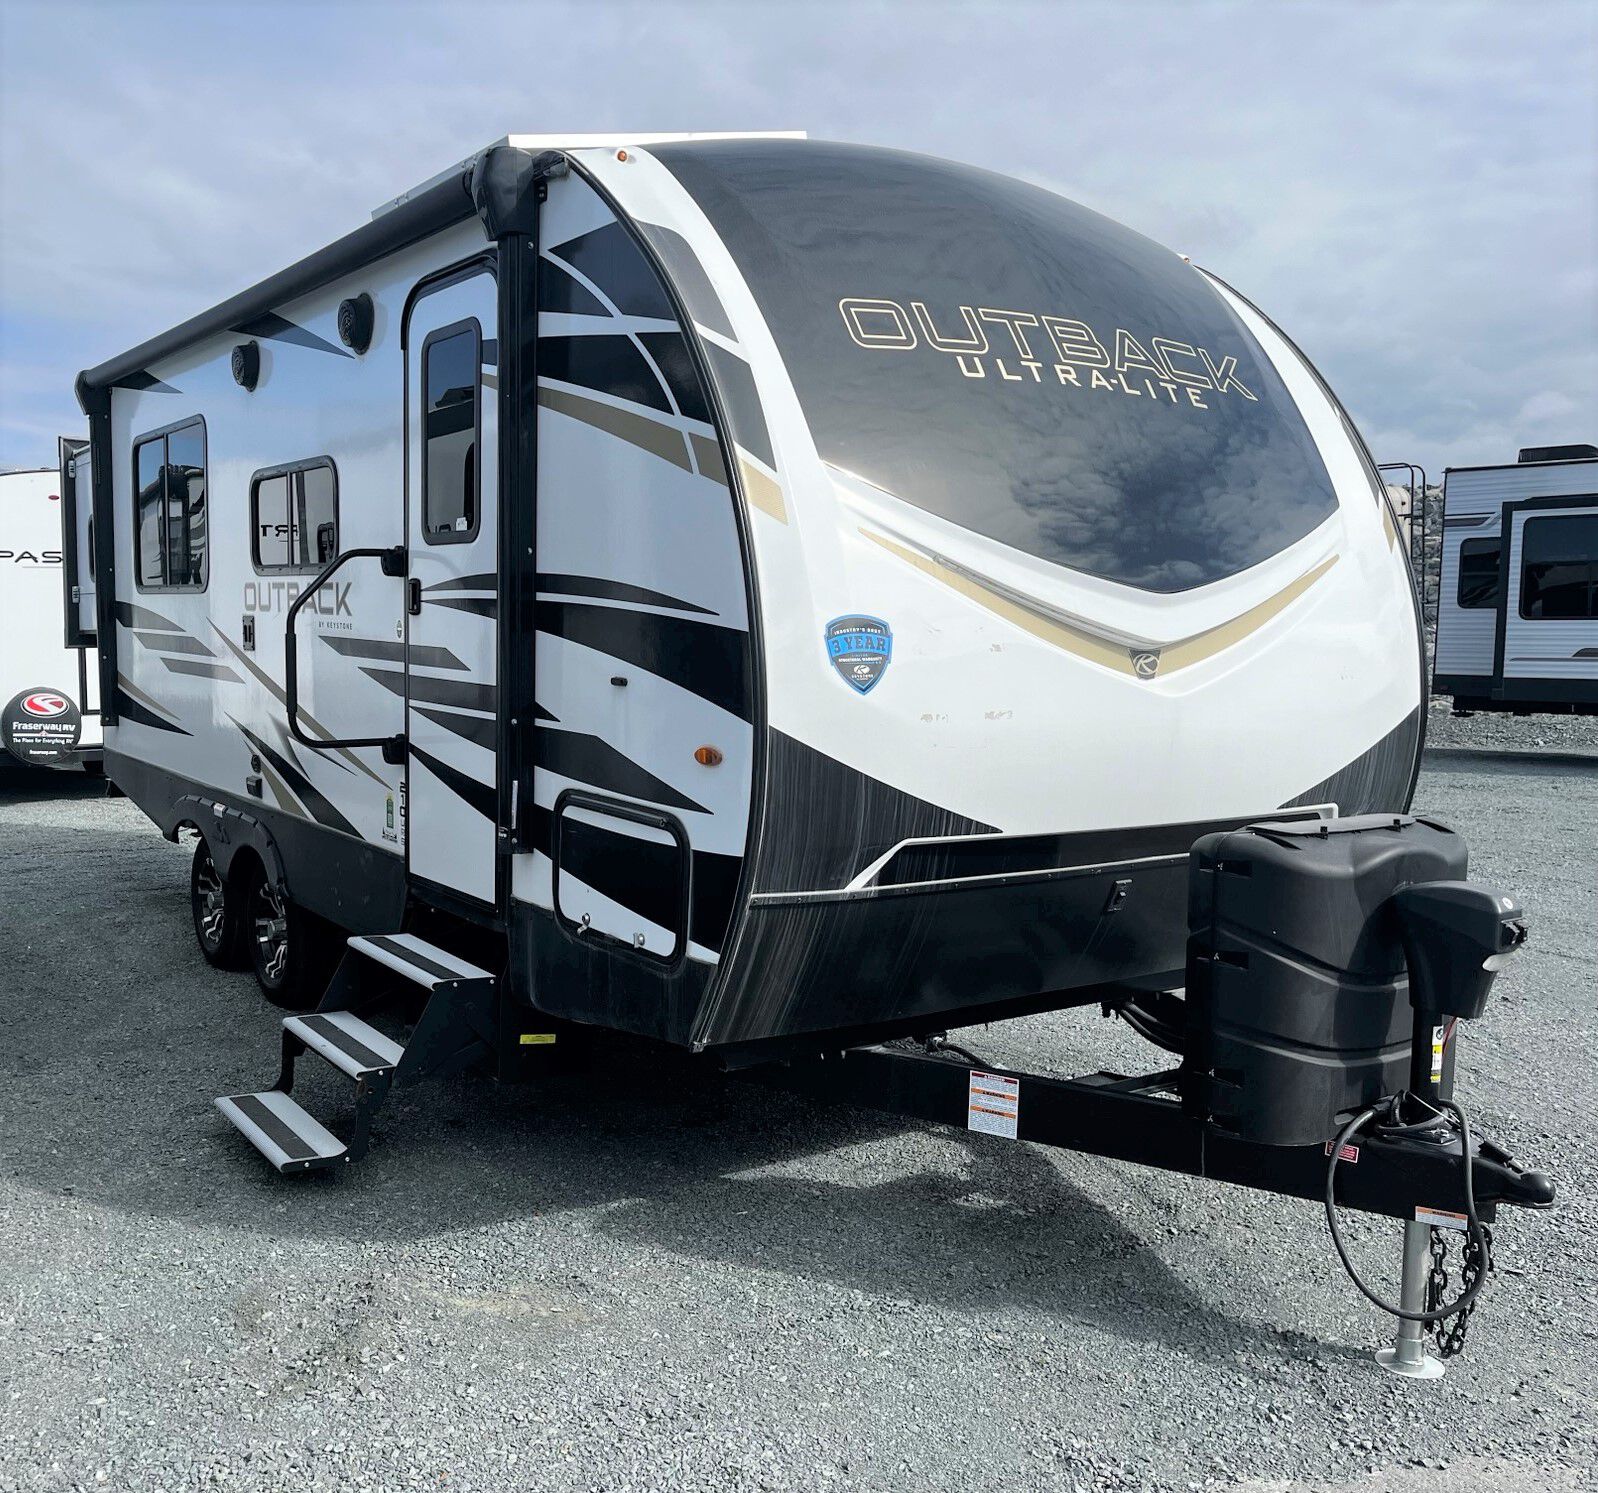 2023 KEYSTONE OUTBACK 210URS for CAD 55490.00  Find this Travel Trailers  and other RVs at Fraserway RV in Halifax